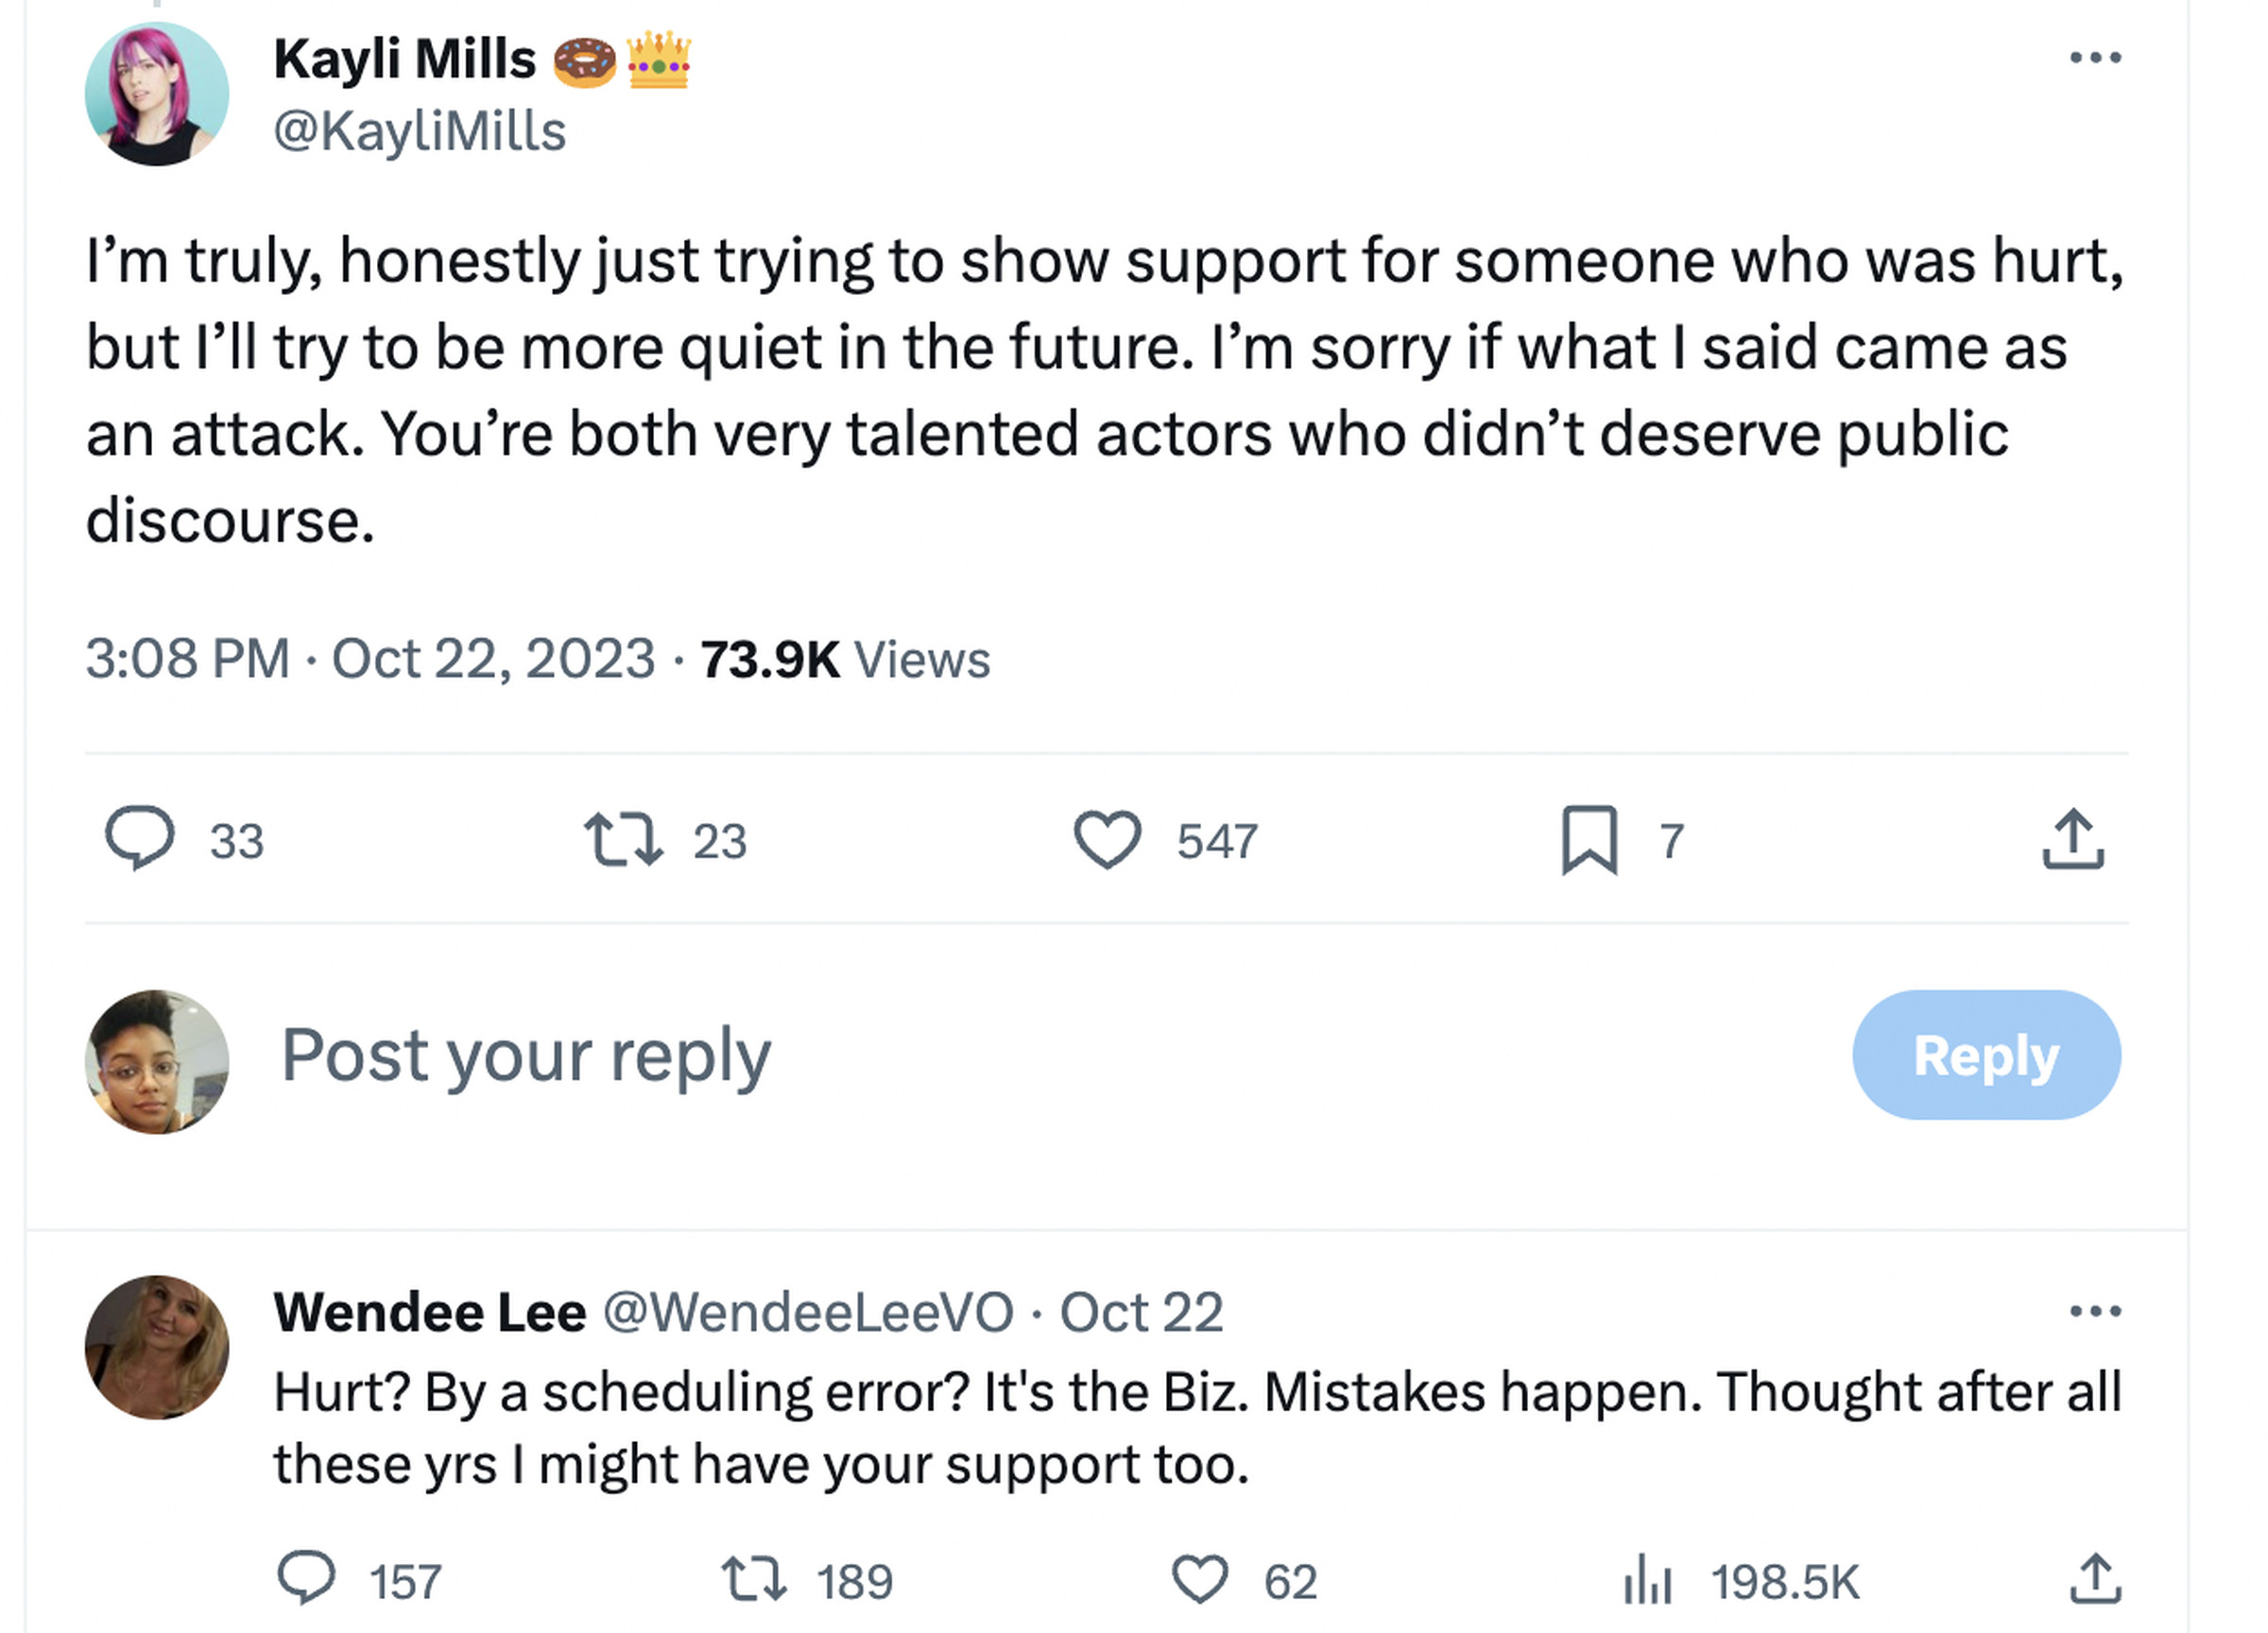 Image from X featuring a post exchange between users with voice actress Wendee Lee writing, Hurt? By a scheduling error? It’s the Biz. Mistakes happen. Thought after all these yrs I might have your support too.